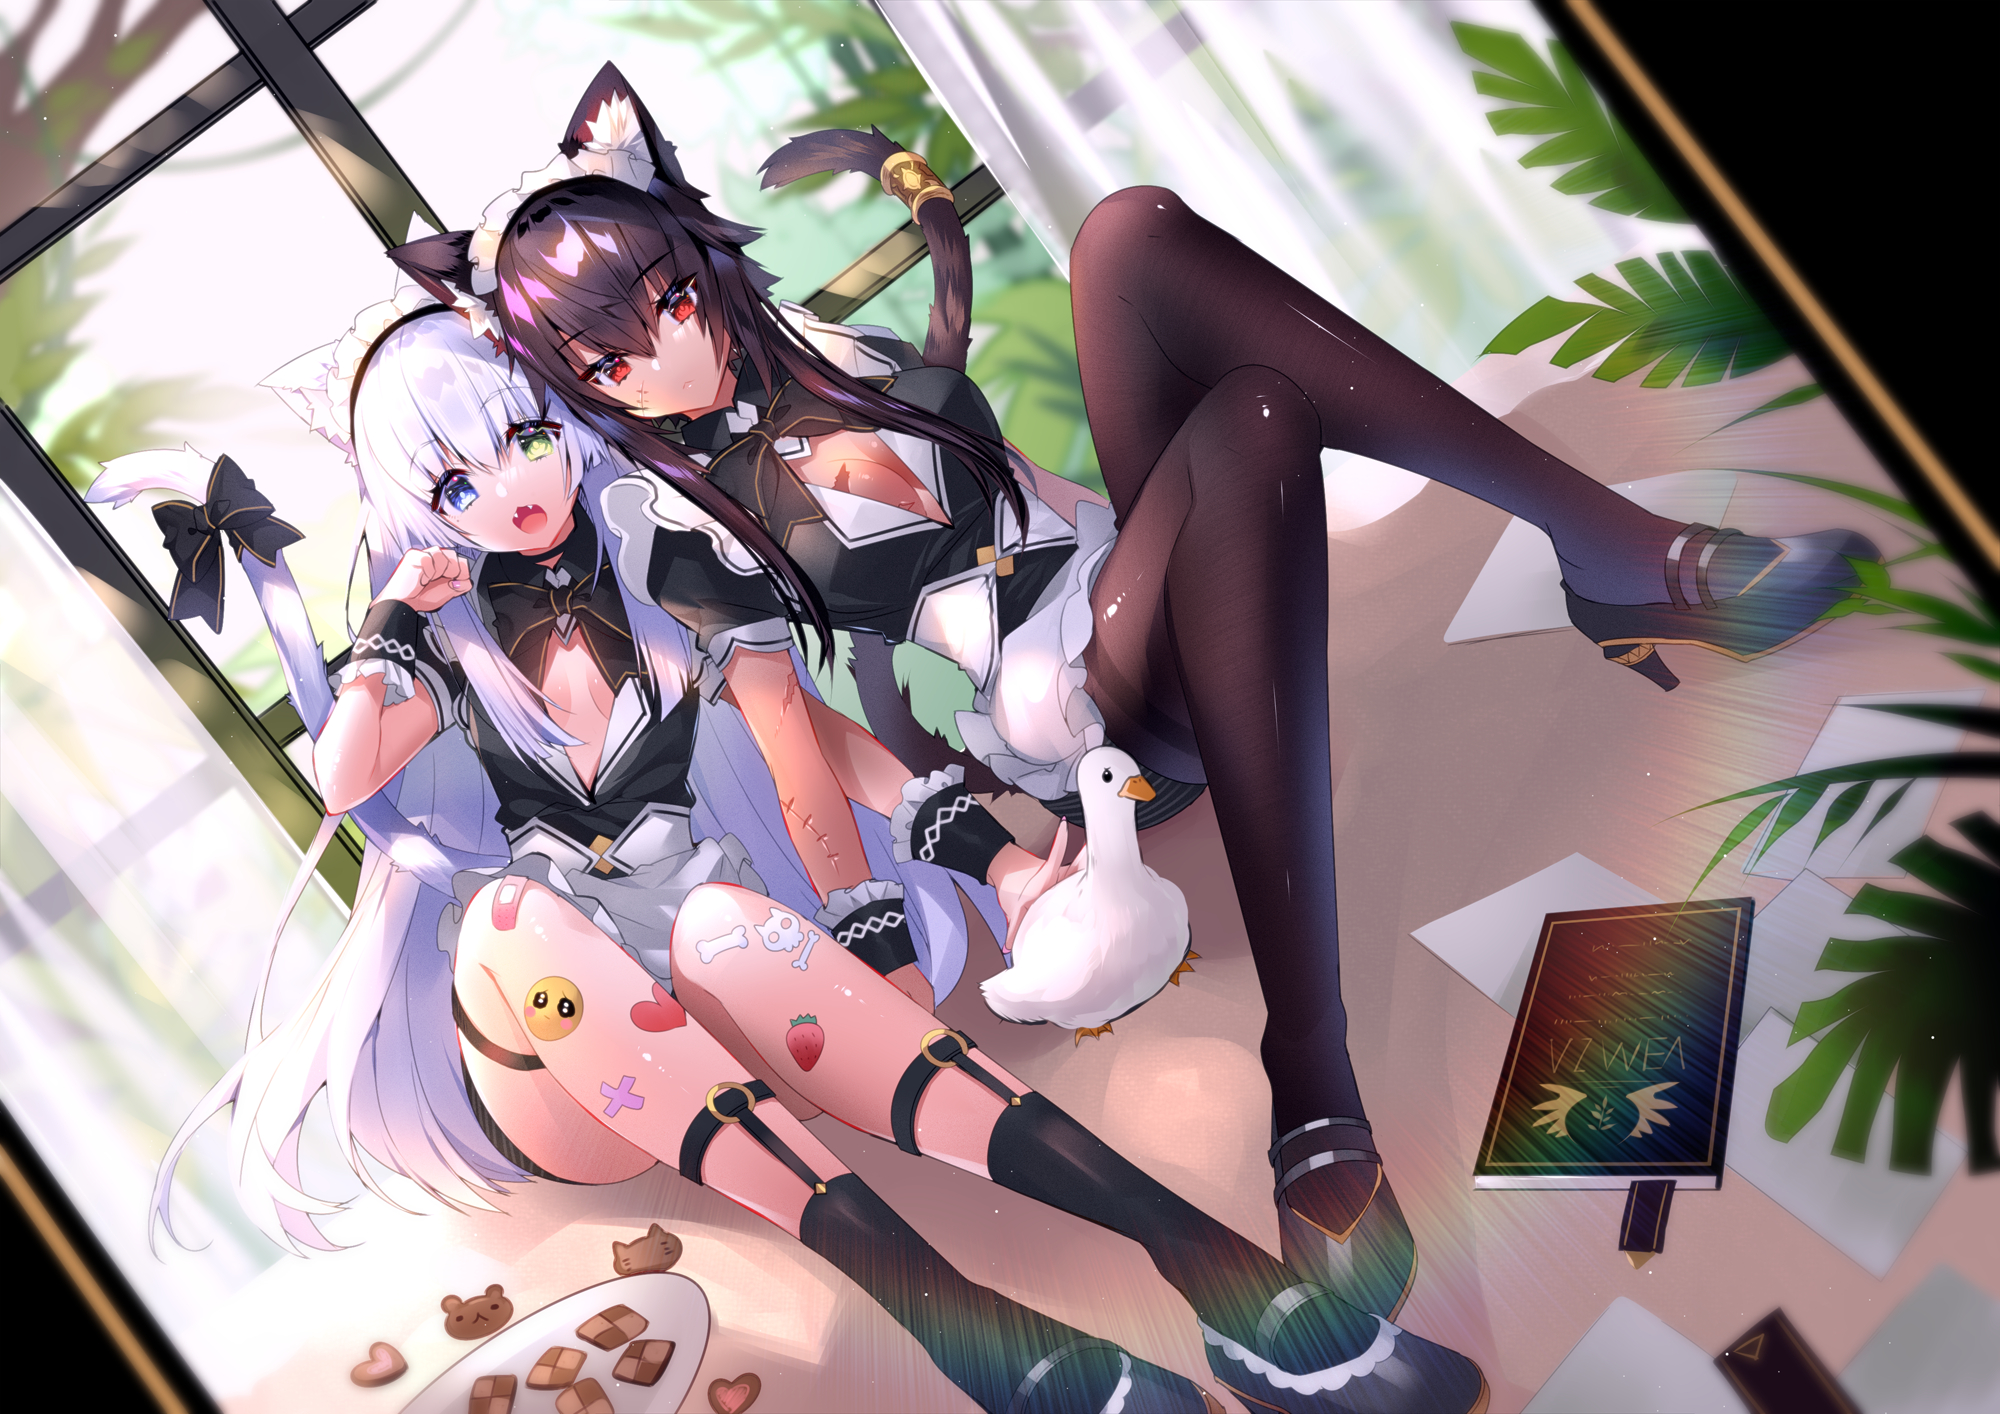 Anime 2000x1414 anime anime girls cat girl maid Usagihime artwork maid outfit cleavage white hair brunette long hair heterochromia red eyes